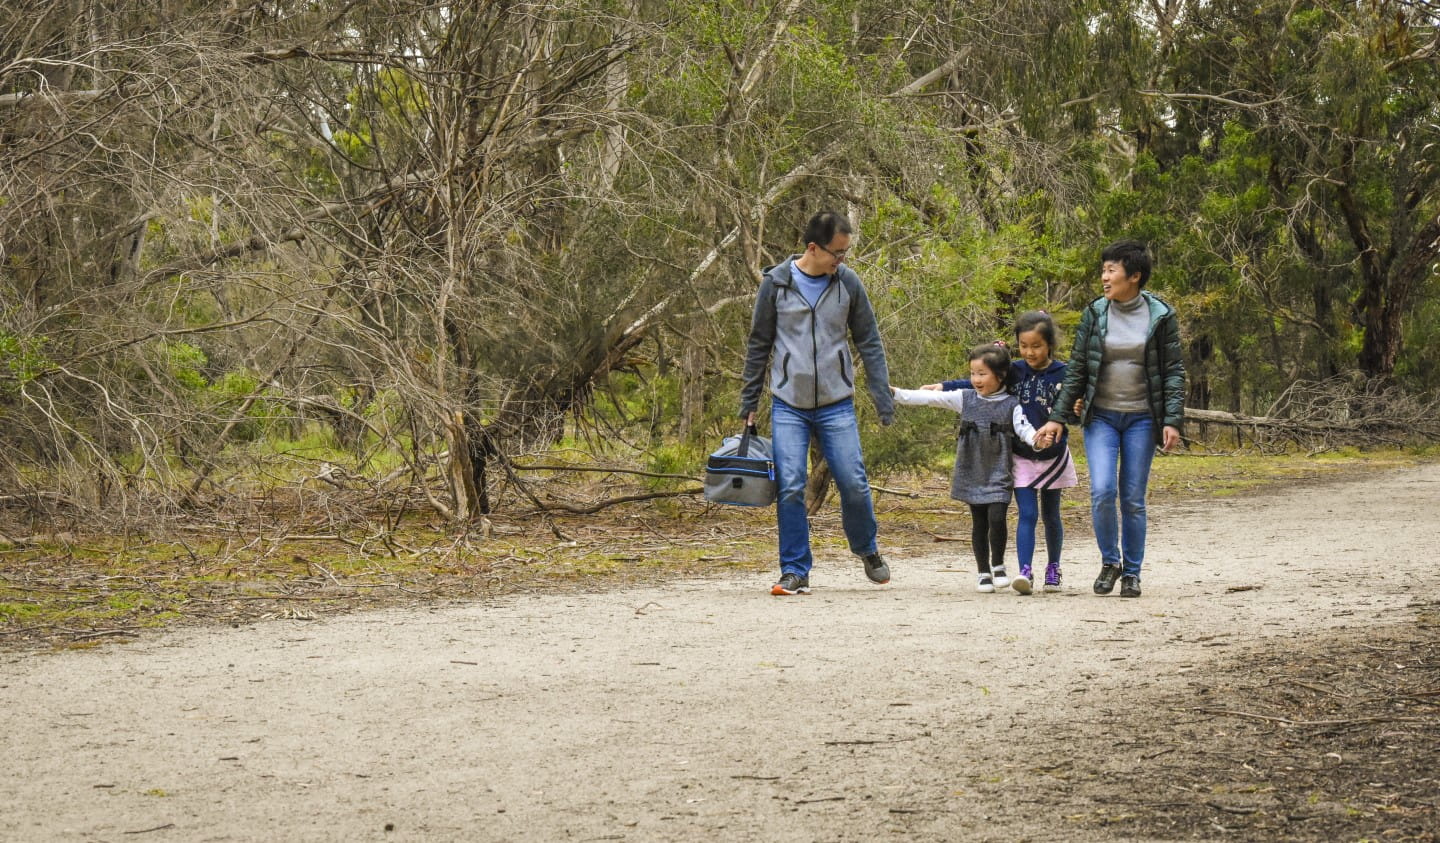 Braeside Park is a great spot for a family picnic.